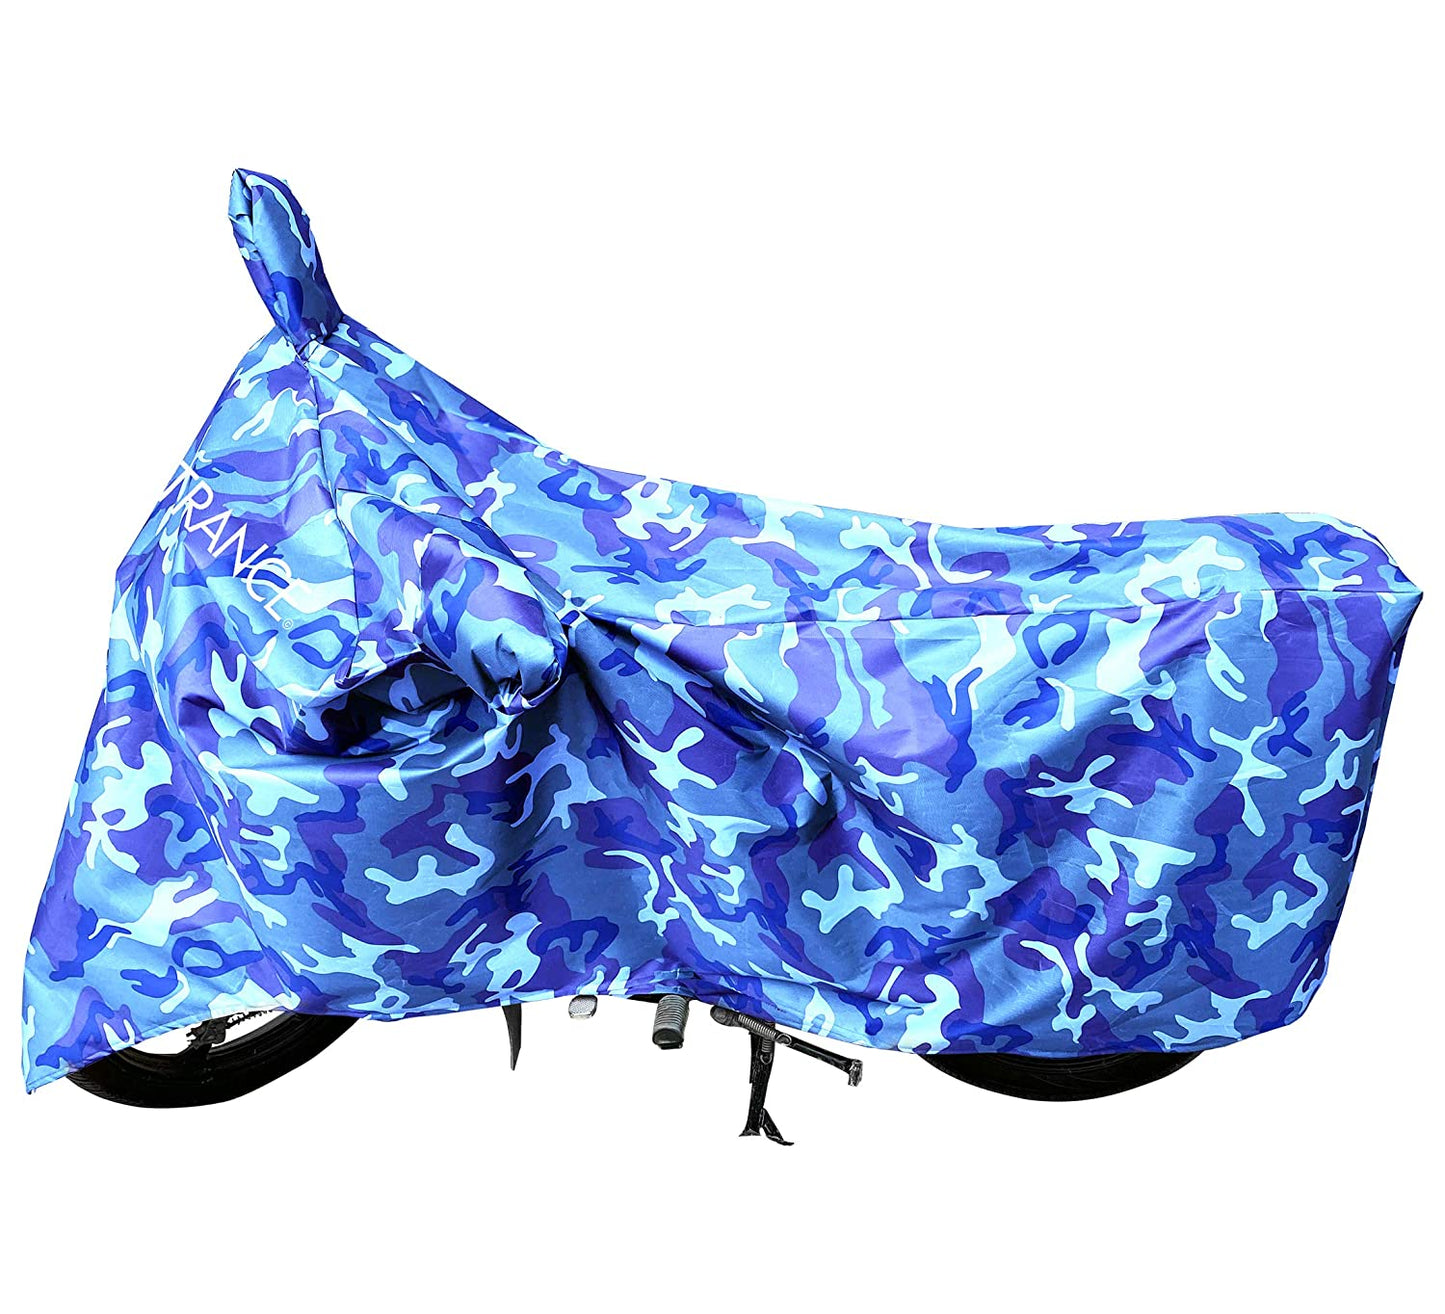 MotoTrance Jungle Bike Body Covers For Royal Enfield Electra 4S - Interlock-Stitched Waterproof and Heat Resistant with Mirror Pockets